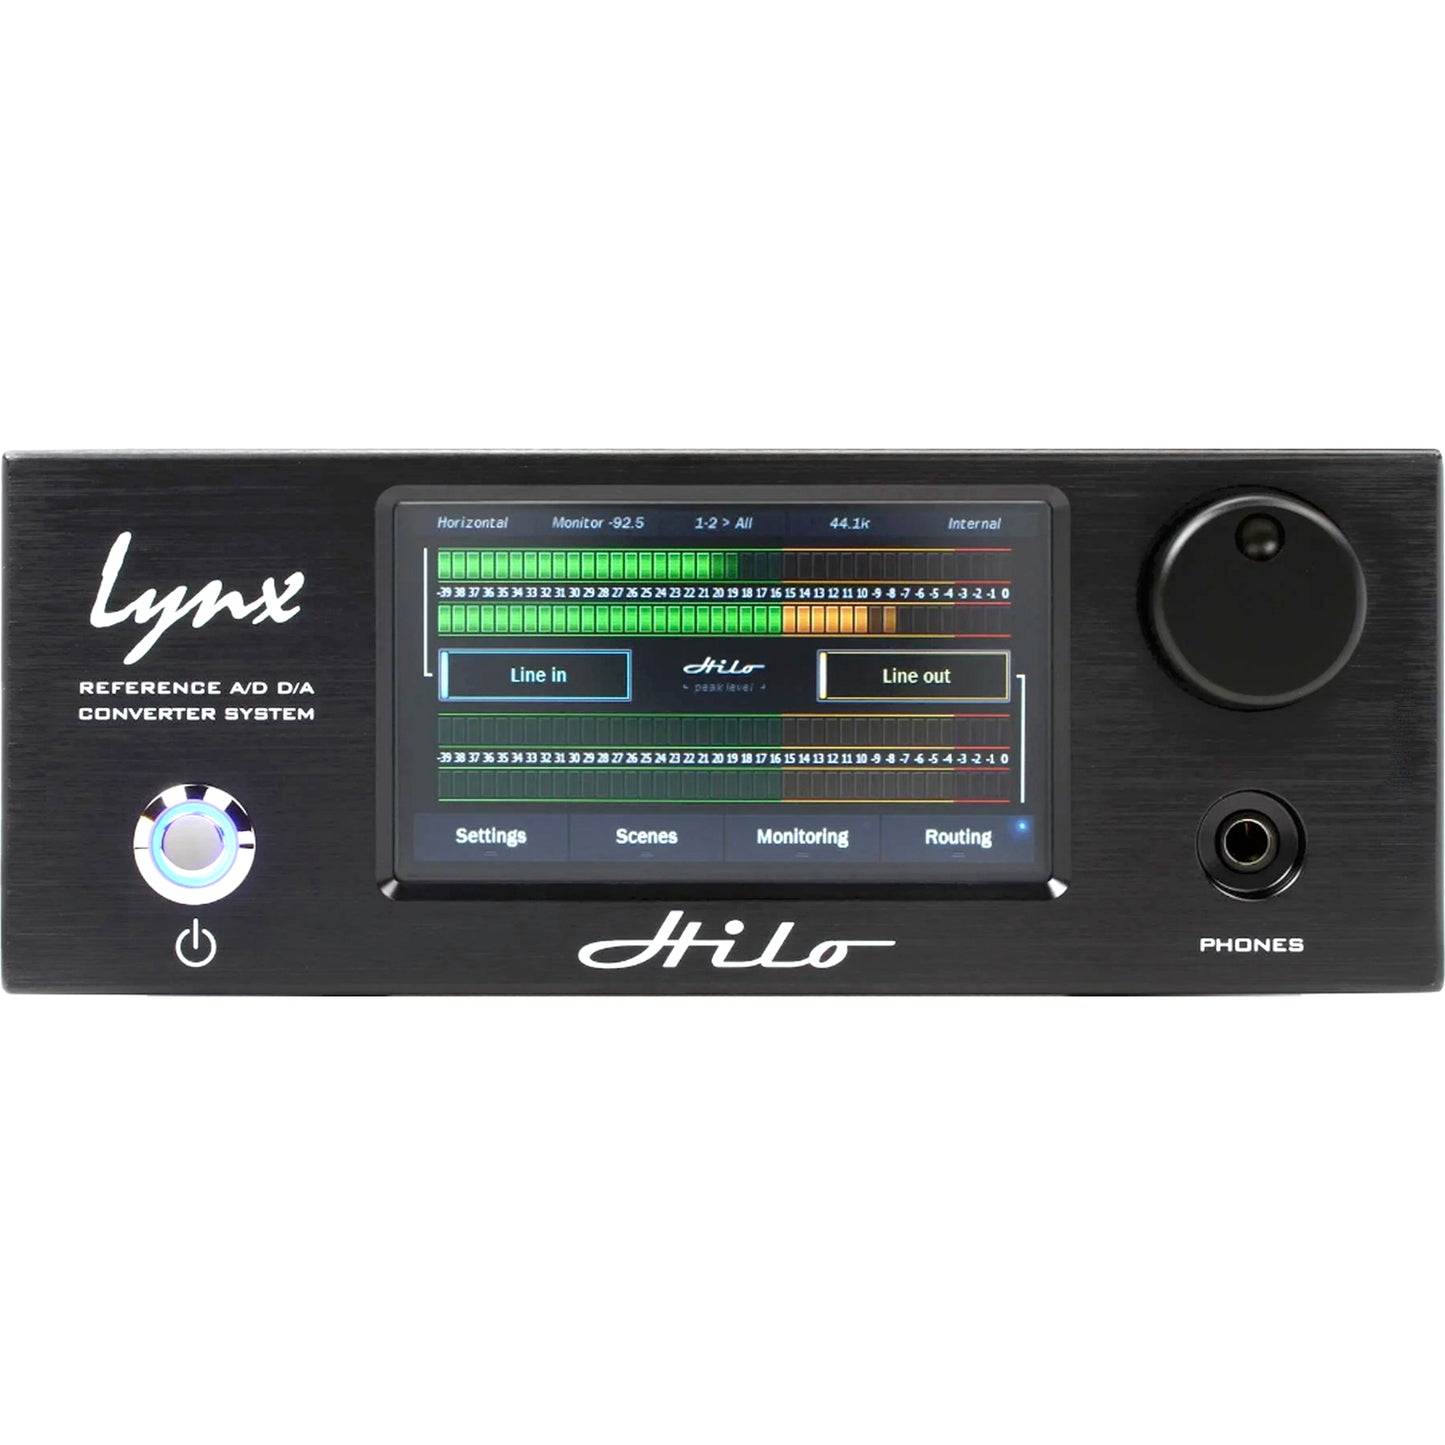 Lynx Hilo A/D D/A Converter System in Black